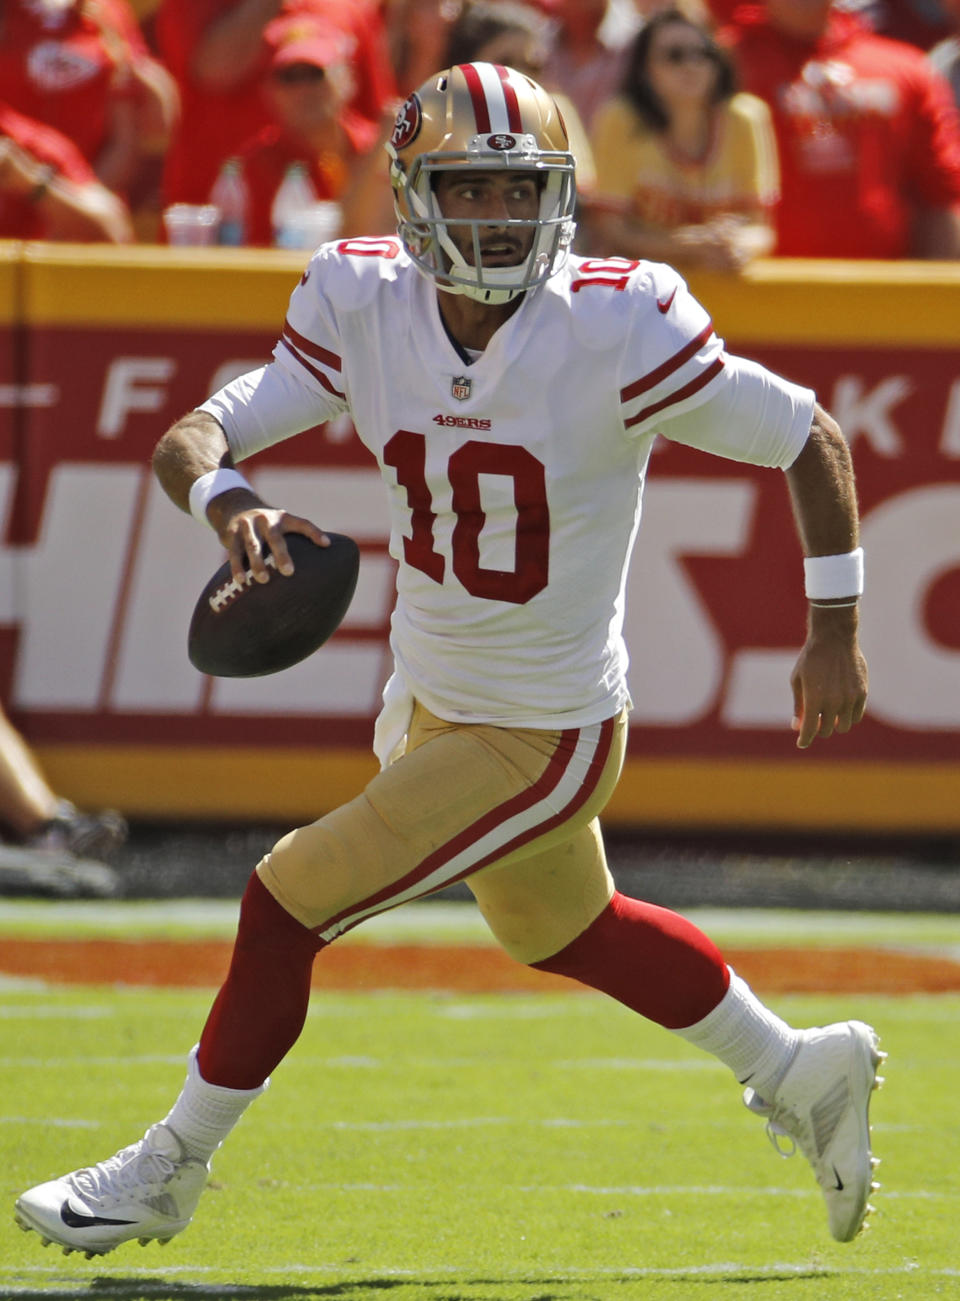 San Francisco 49ers quarterback Jimmy Garoppolo (10) carries the ball during the first half of an NFL football game against the Kansas City Chiefs in Kansas City, Mo., Sunday, Sept. 23, 2018. (AP Photo/Charlie Riedel)